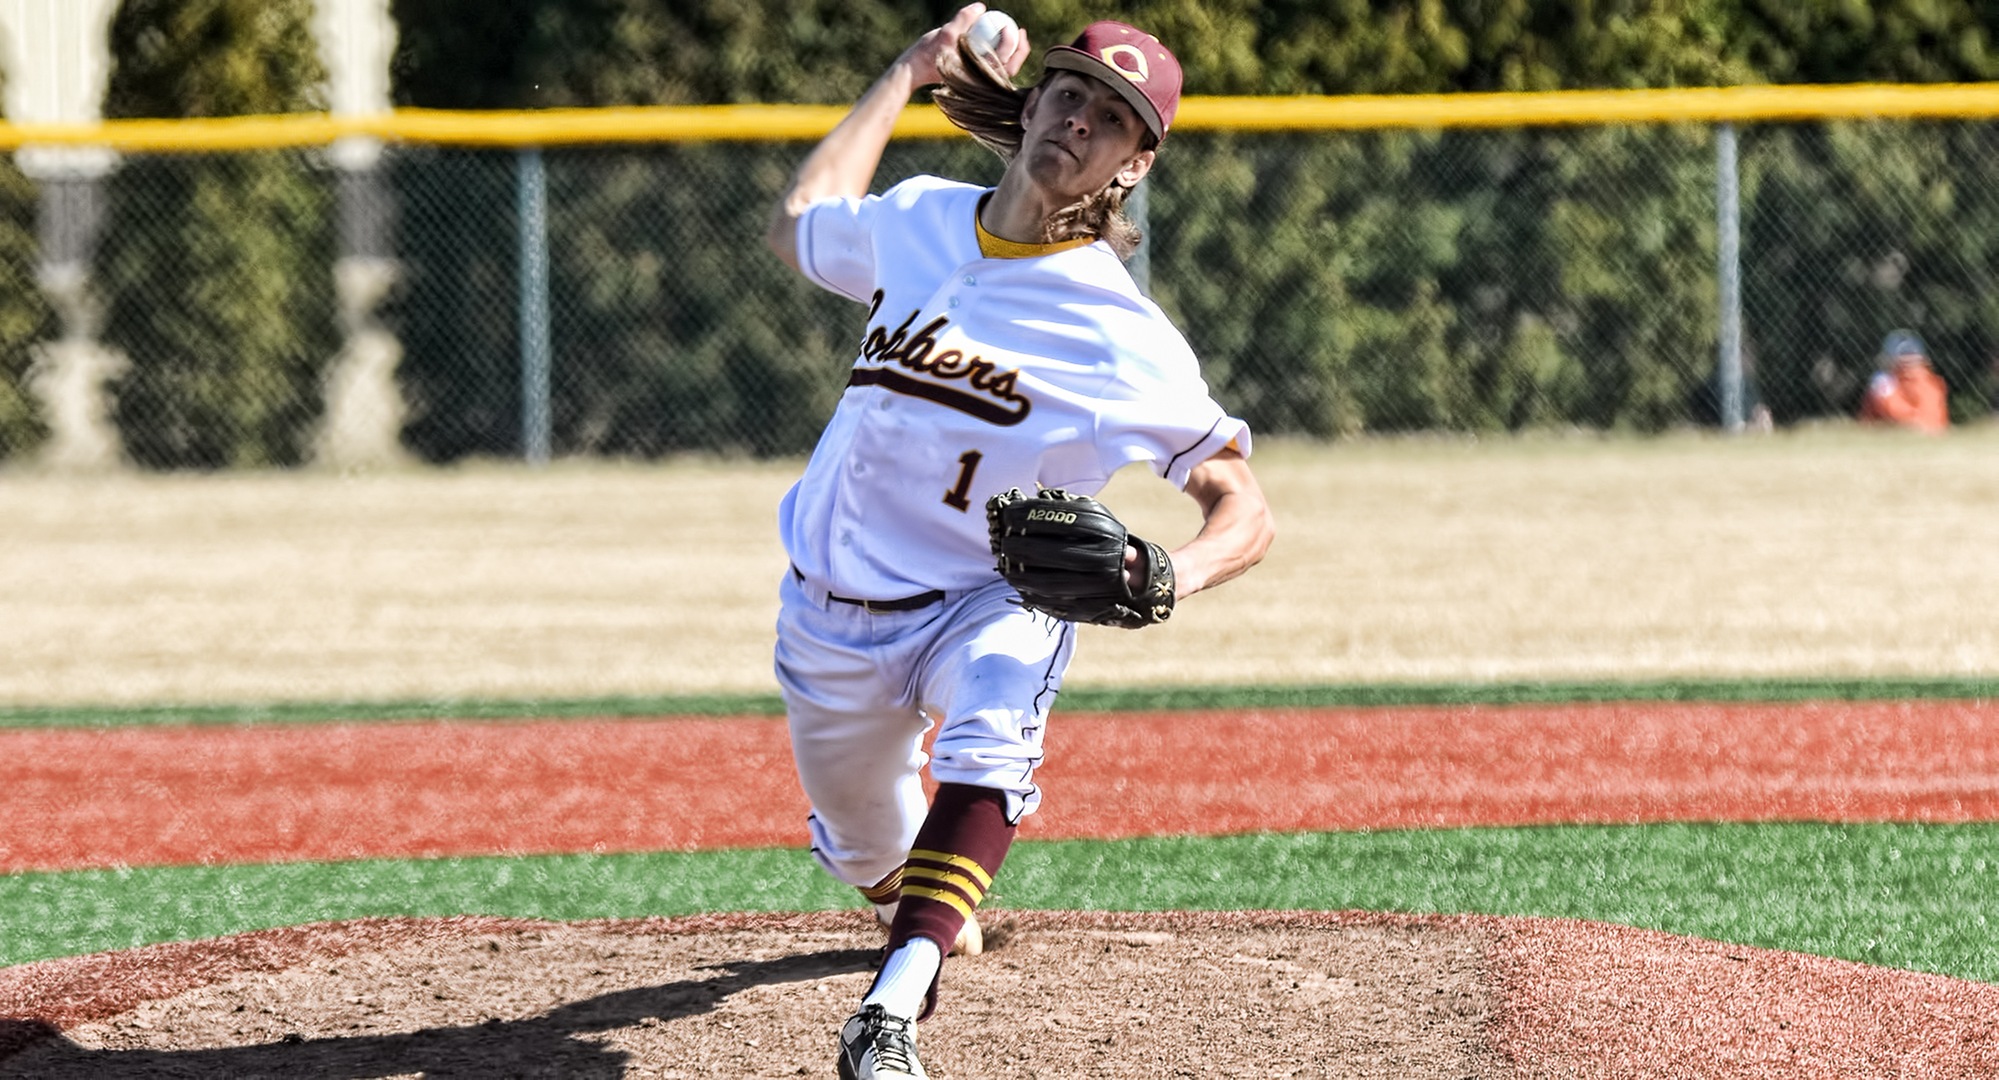 Junior pitcher Zack Nelson allowed just three hits and helped the Cobbers post a 3-2 win over DII Concordia-St. Paul in the first game of the doubleheader sweep.